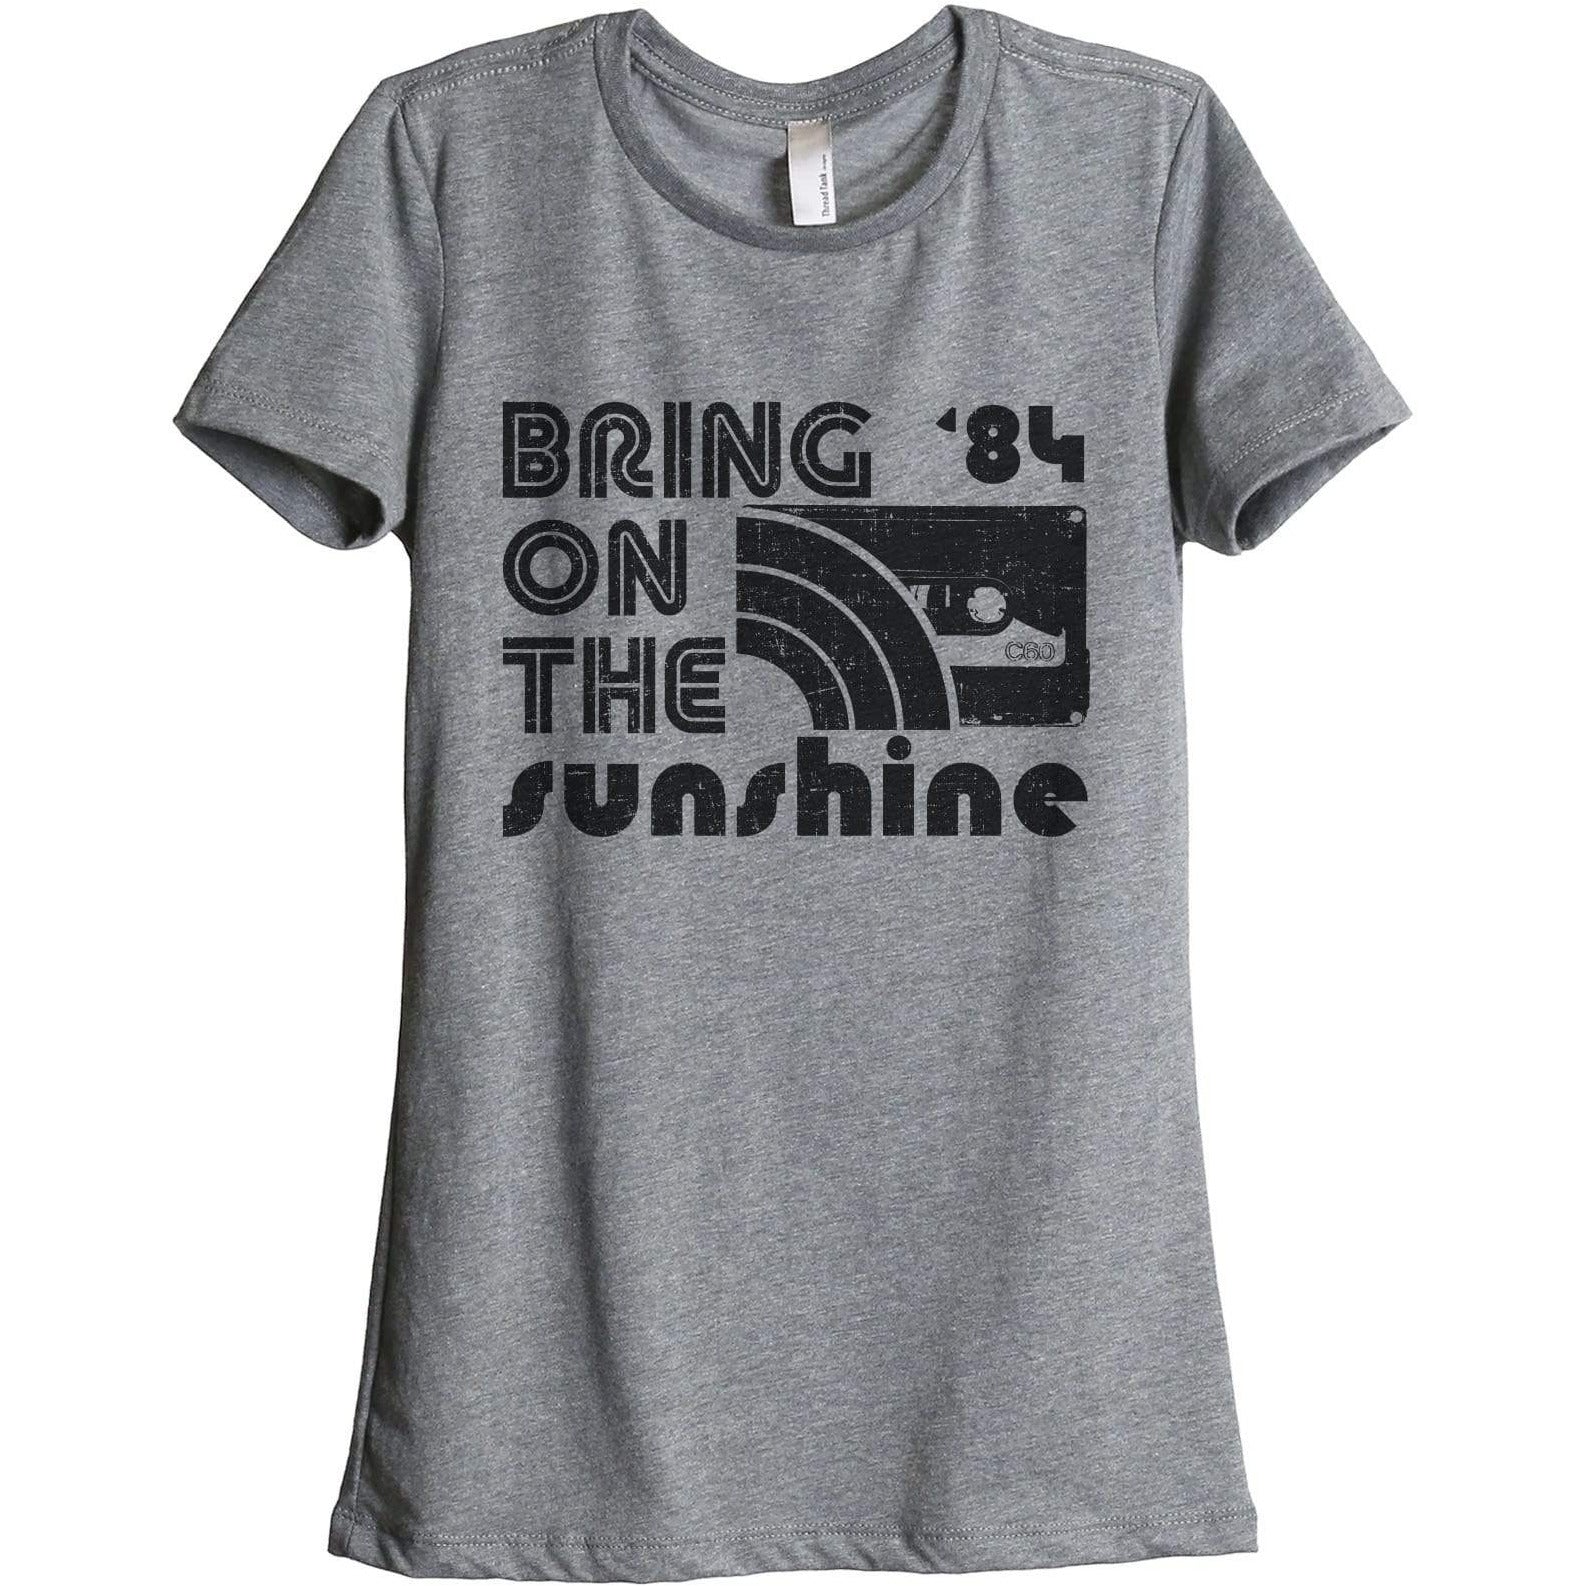 Bring On The Sunshine - Thread Tank | Stories You Can Wear | T-Shirts, Tank Tops and Sweatshirts